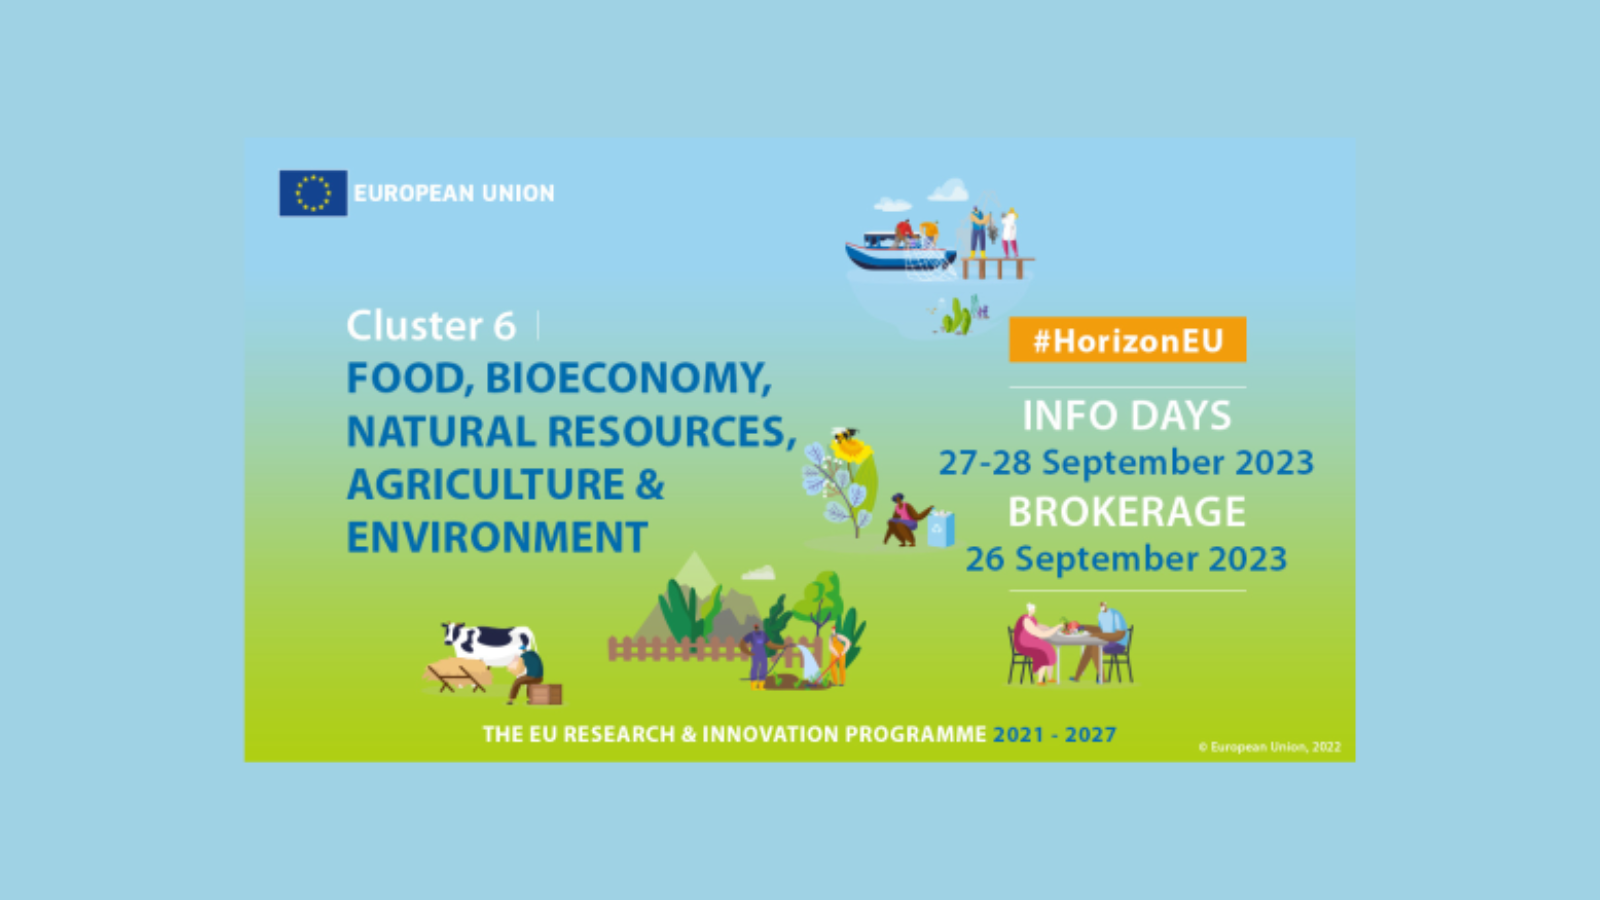 Cluster 6 Info Days - Food, Bioeconomy, Natural Resources, Agriculture & Environment